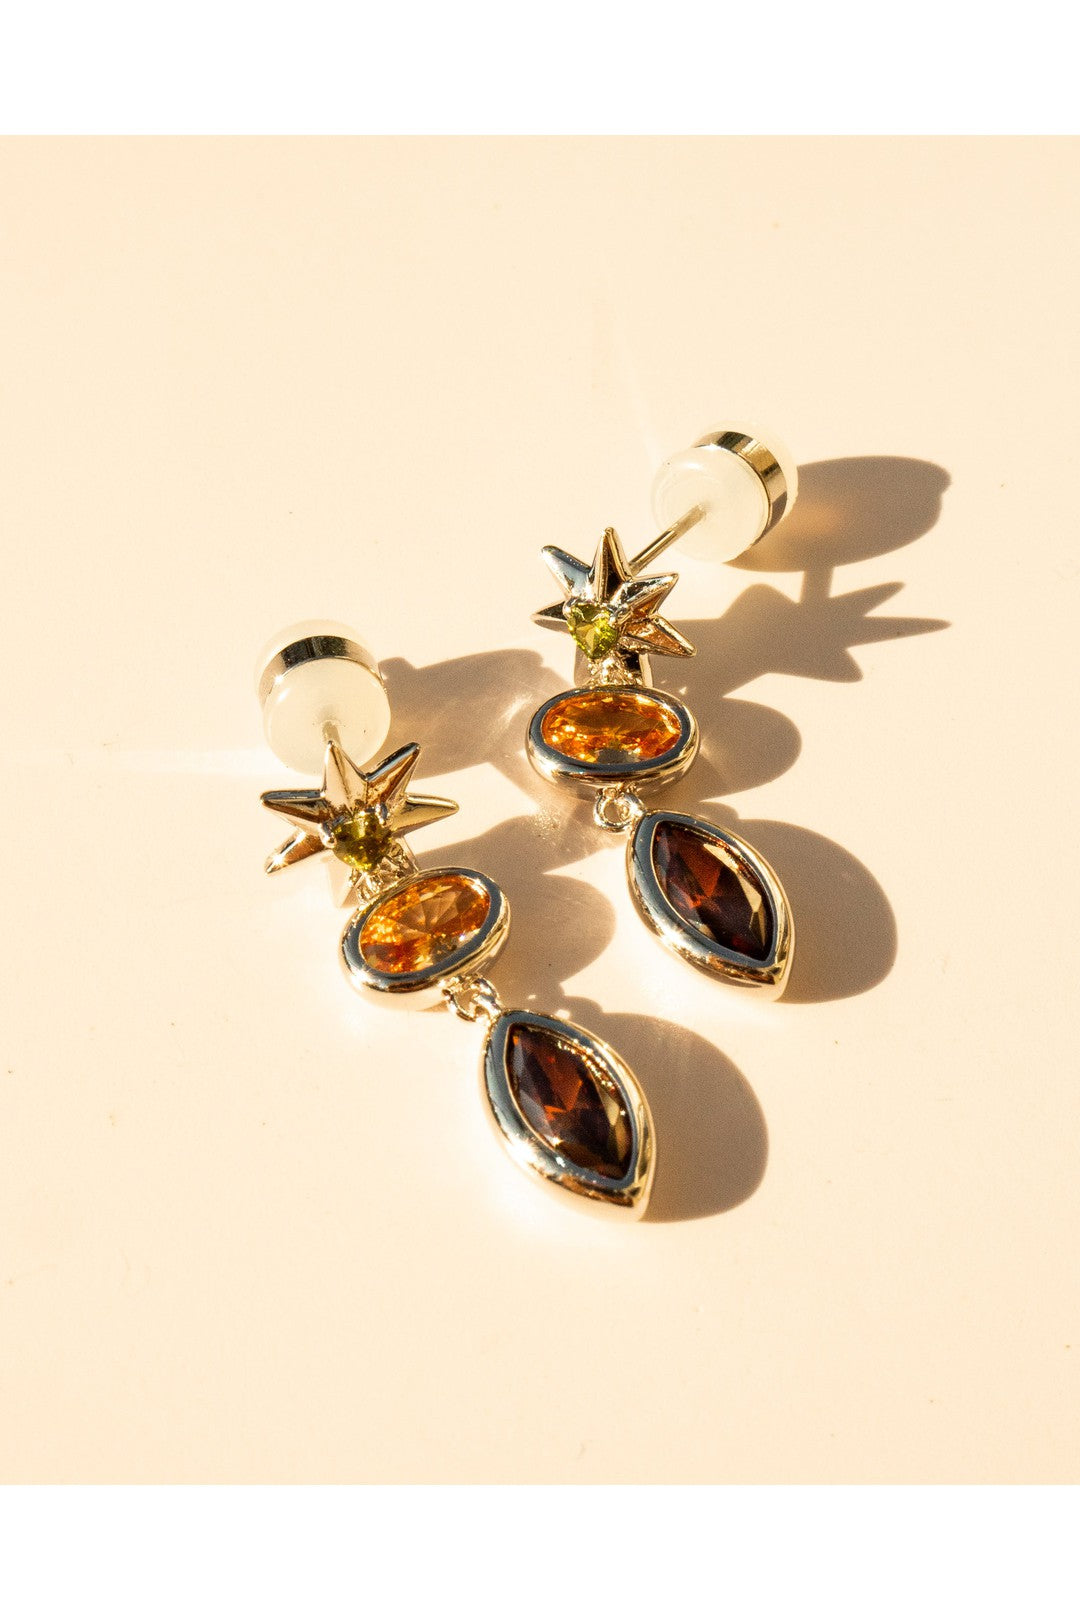 The starry stone studs, gold